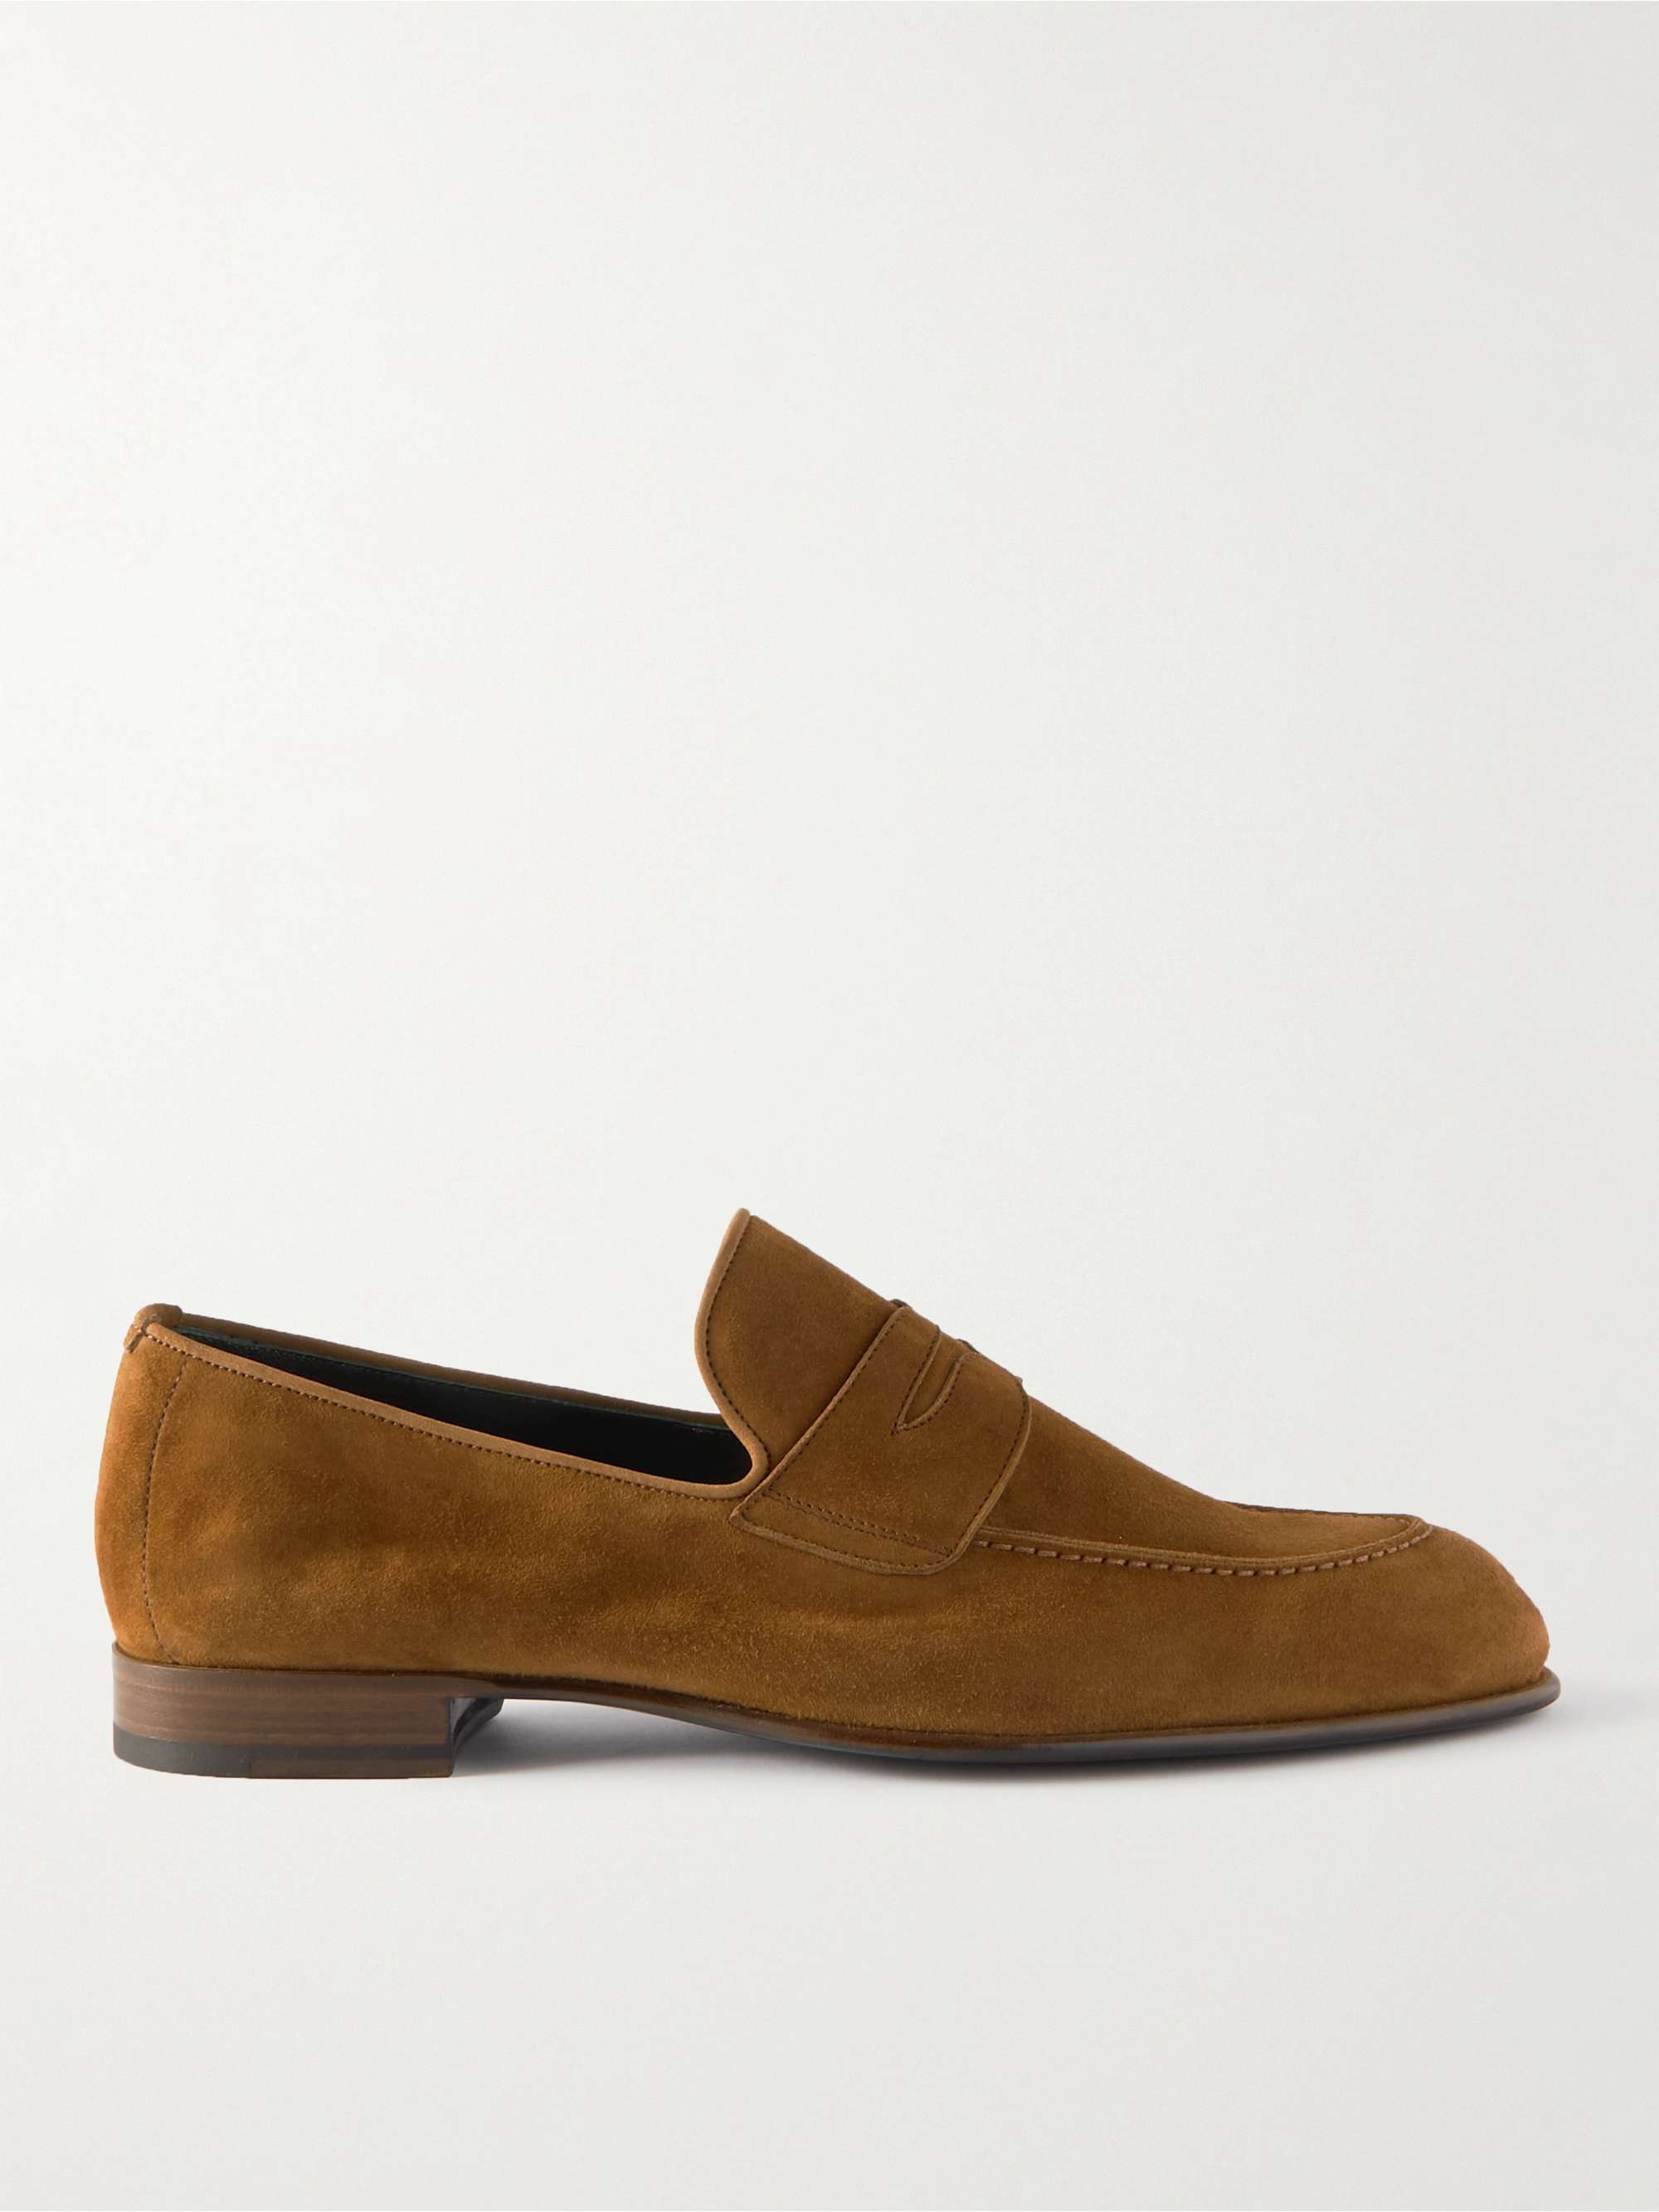 BRIONI Leather-Trimmed Suede Penny Loafers